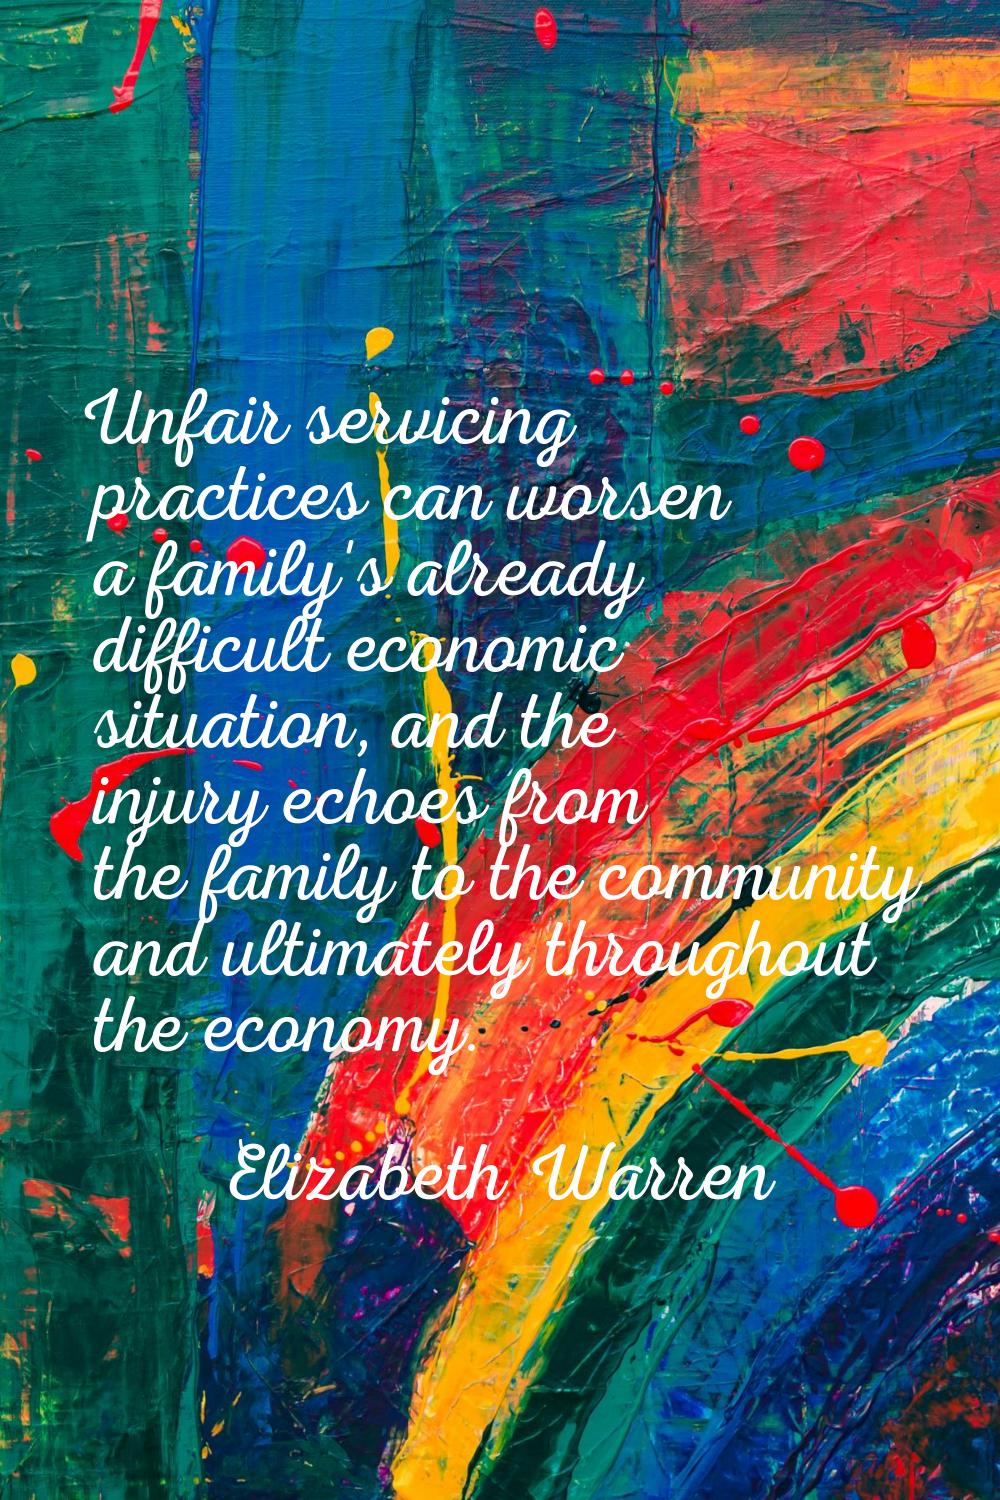 Unfair servicing practices can worsen a family's already difficult economic situation, and the inju